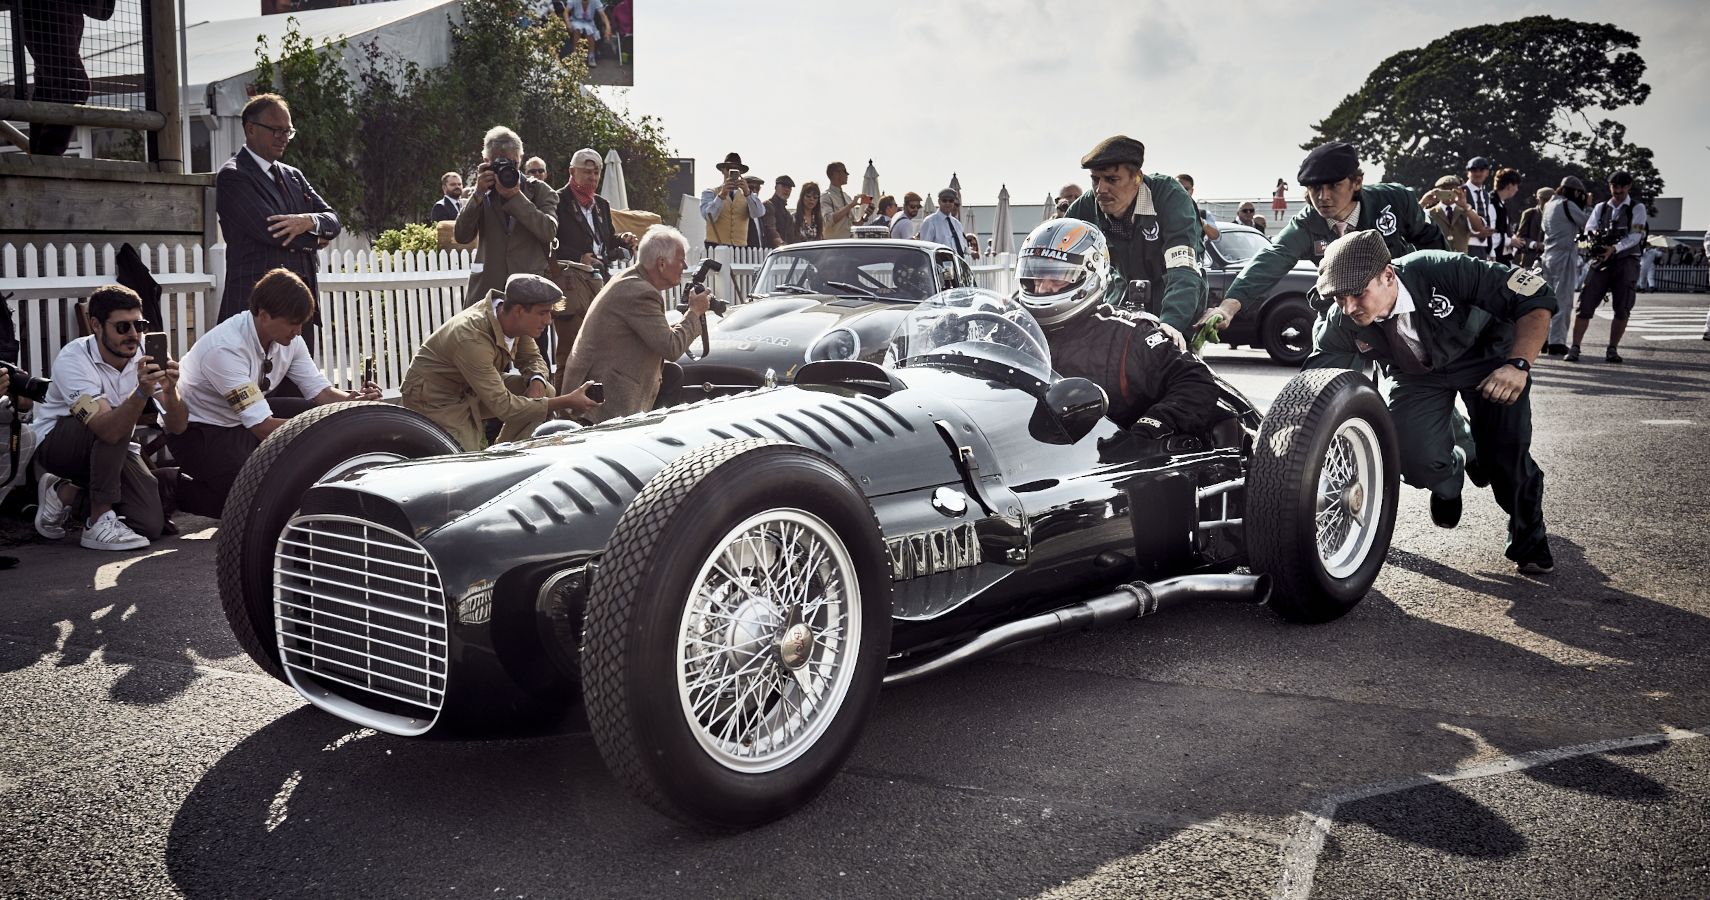 This Is Why Every Classic Car Enthusiast Should Check Out The Goodwood Revival